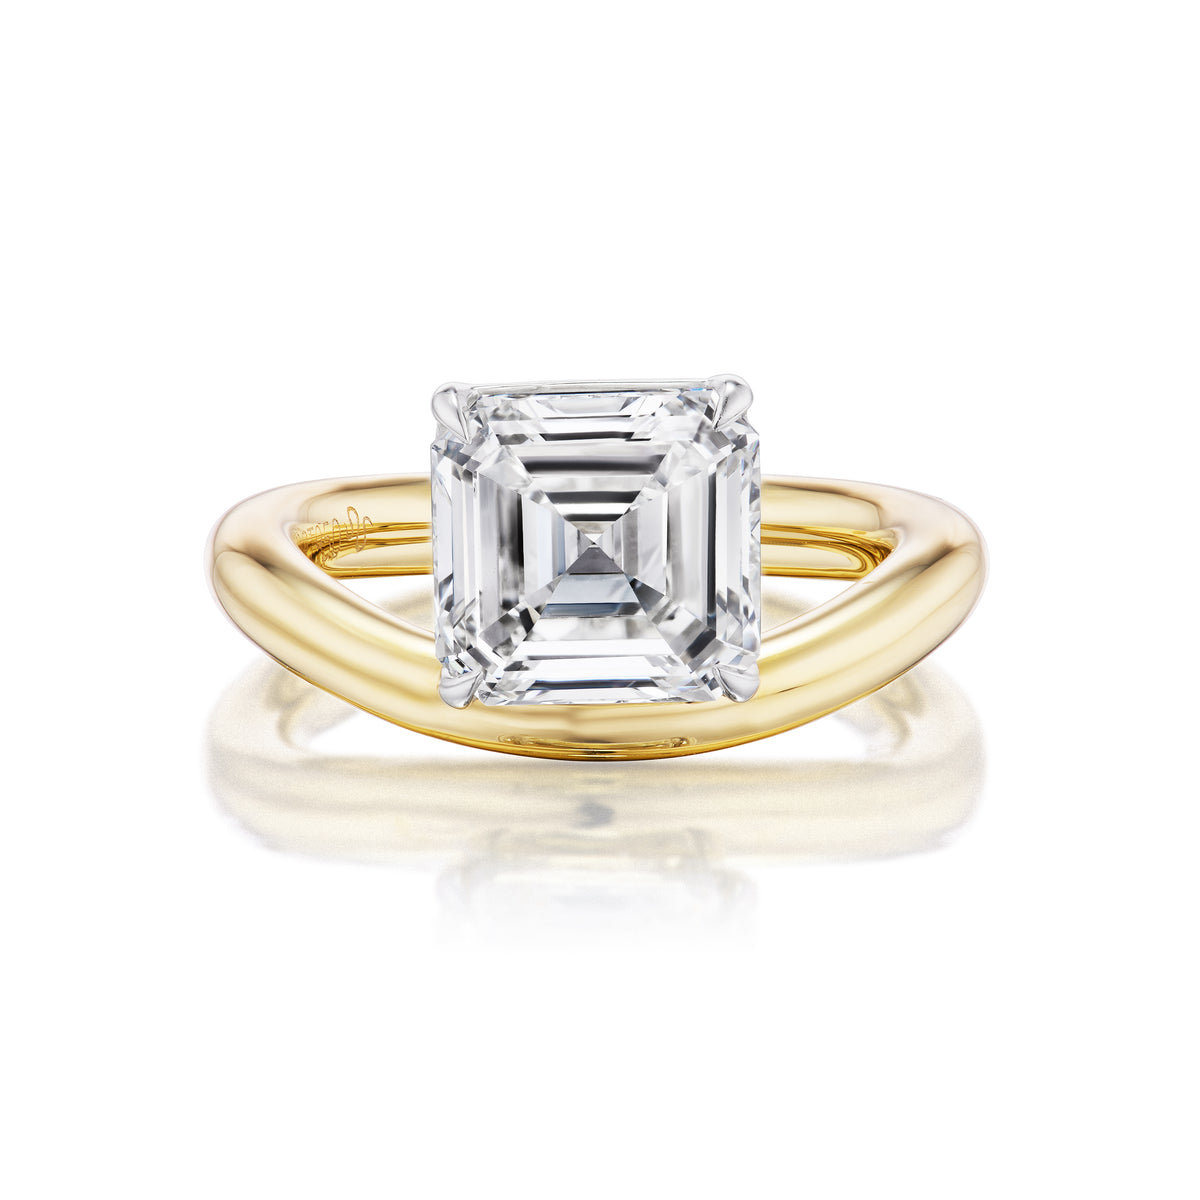 Pinky Ring in Yellow Gold with Asscher Cut Diamond